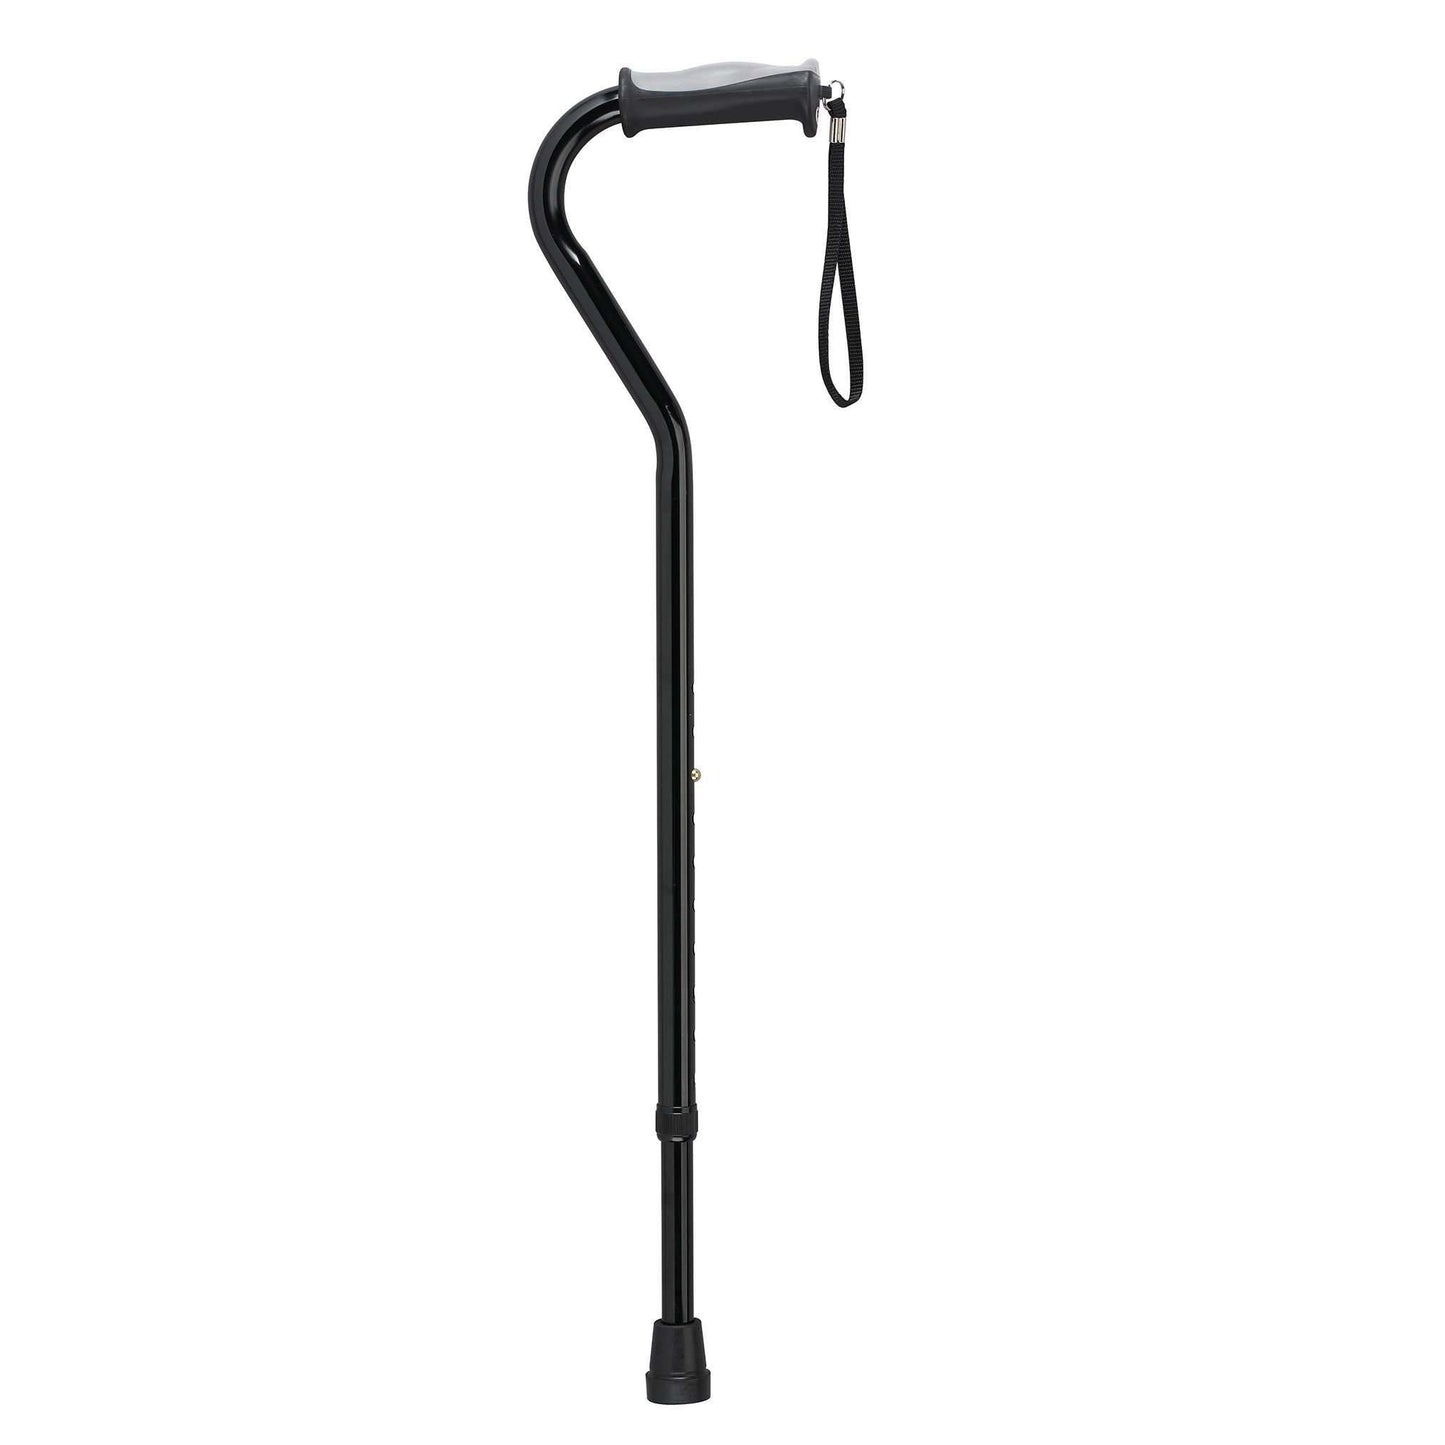 Drive rtl10372bk Adjustable Height Offset Handle Cane with Gel Hand Grip, Black